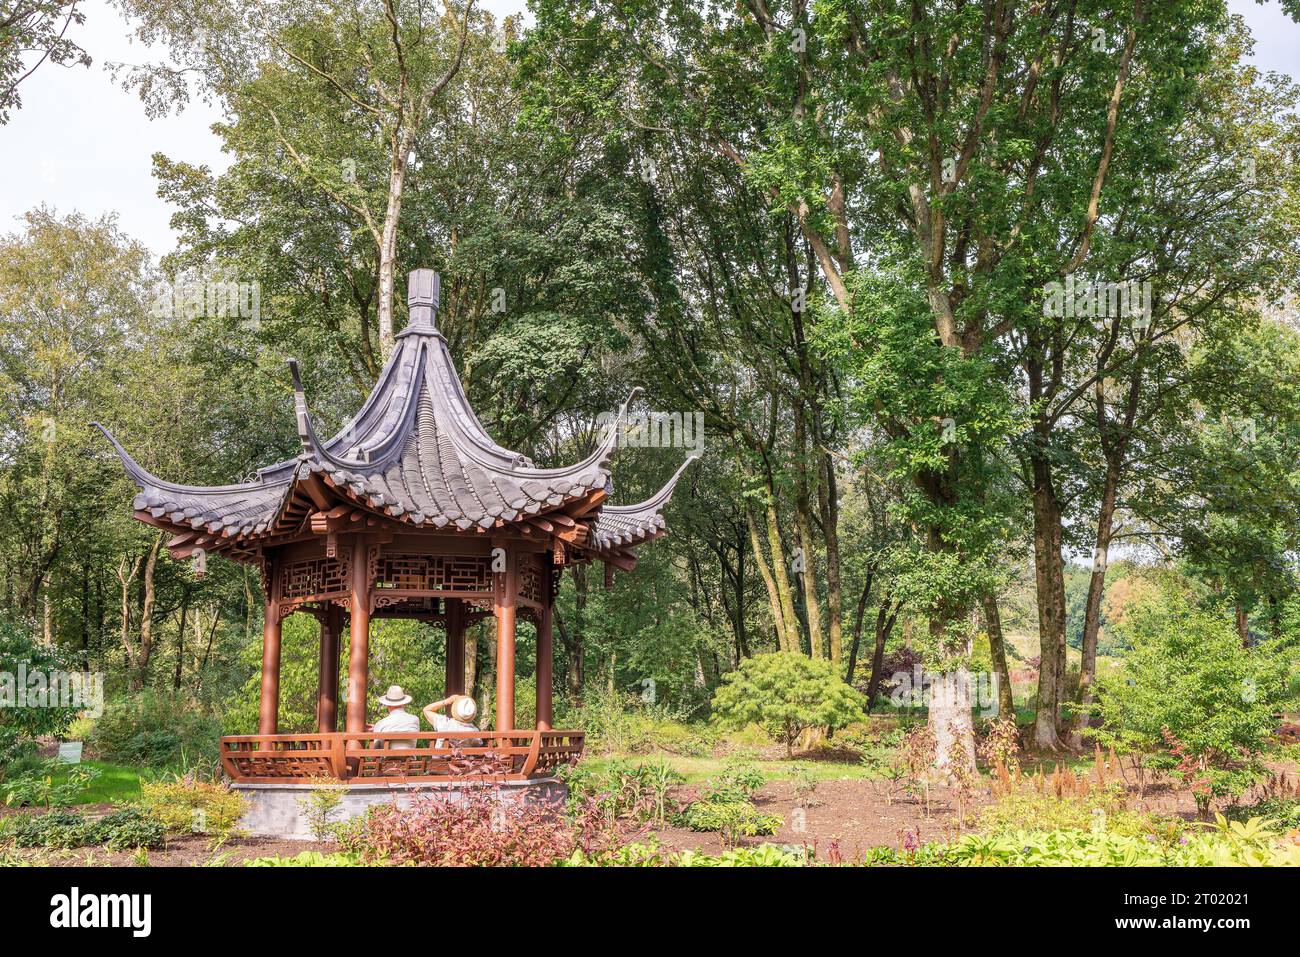 Qing Yin Pavilion - authentically-built Chinese music pavilion in the grounds of  RHS Garden Bridgewater. Stock Photo